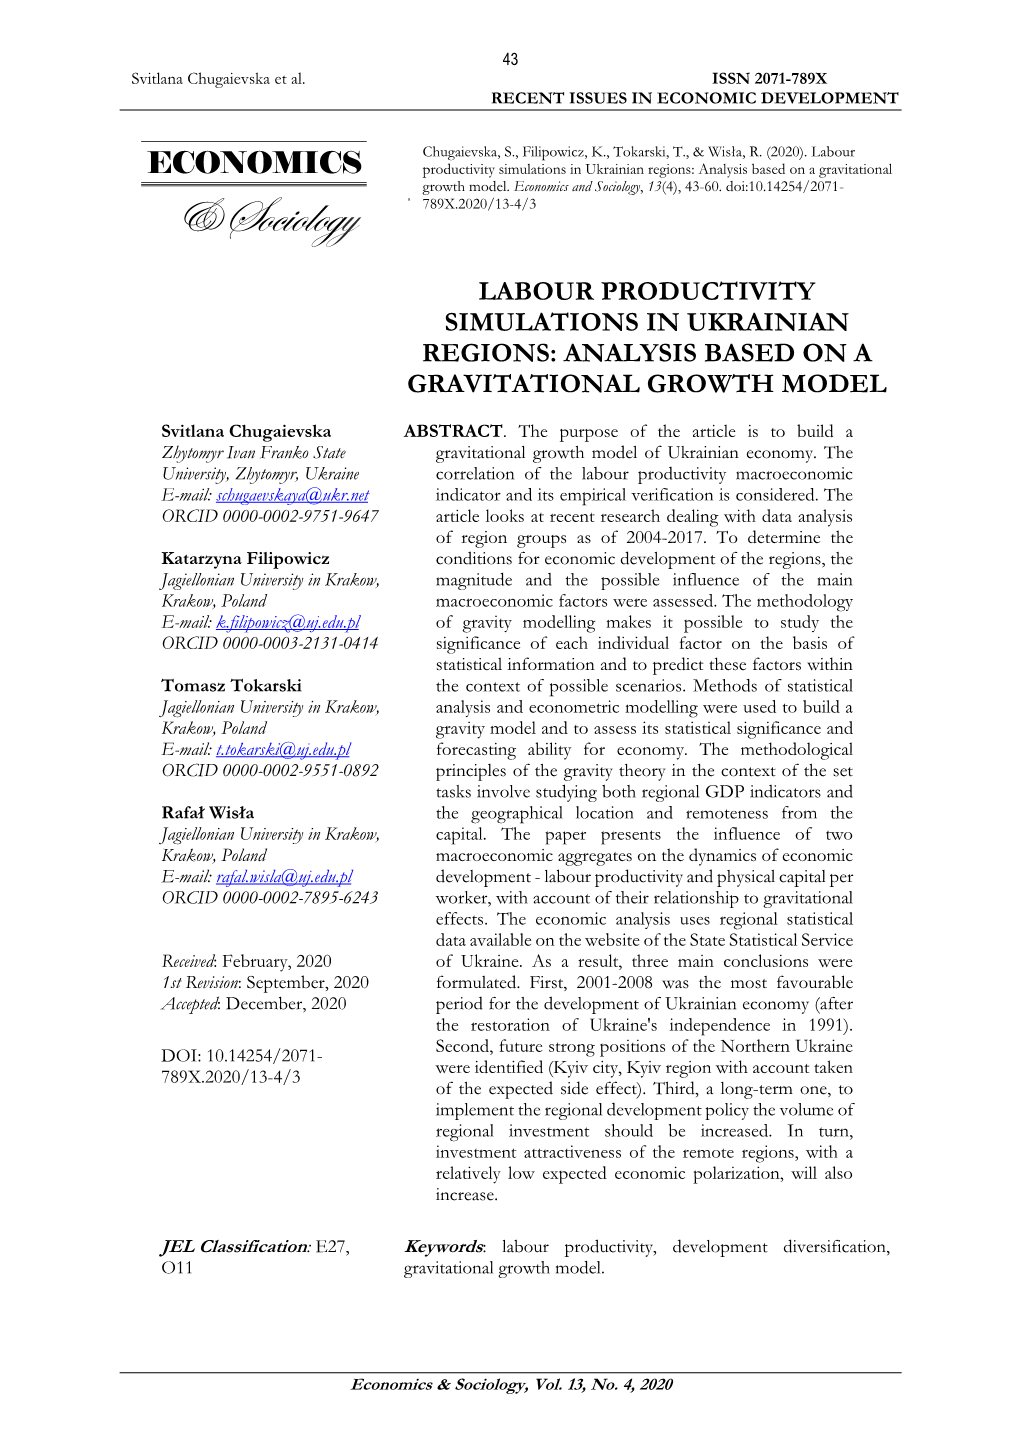 Labour Productivity Simulations in Ukrainian Regions: Analysis Based on a Gravitational Growth Model